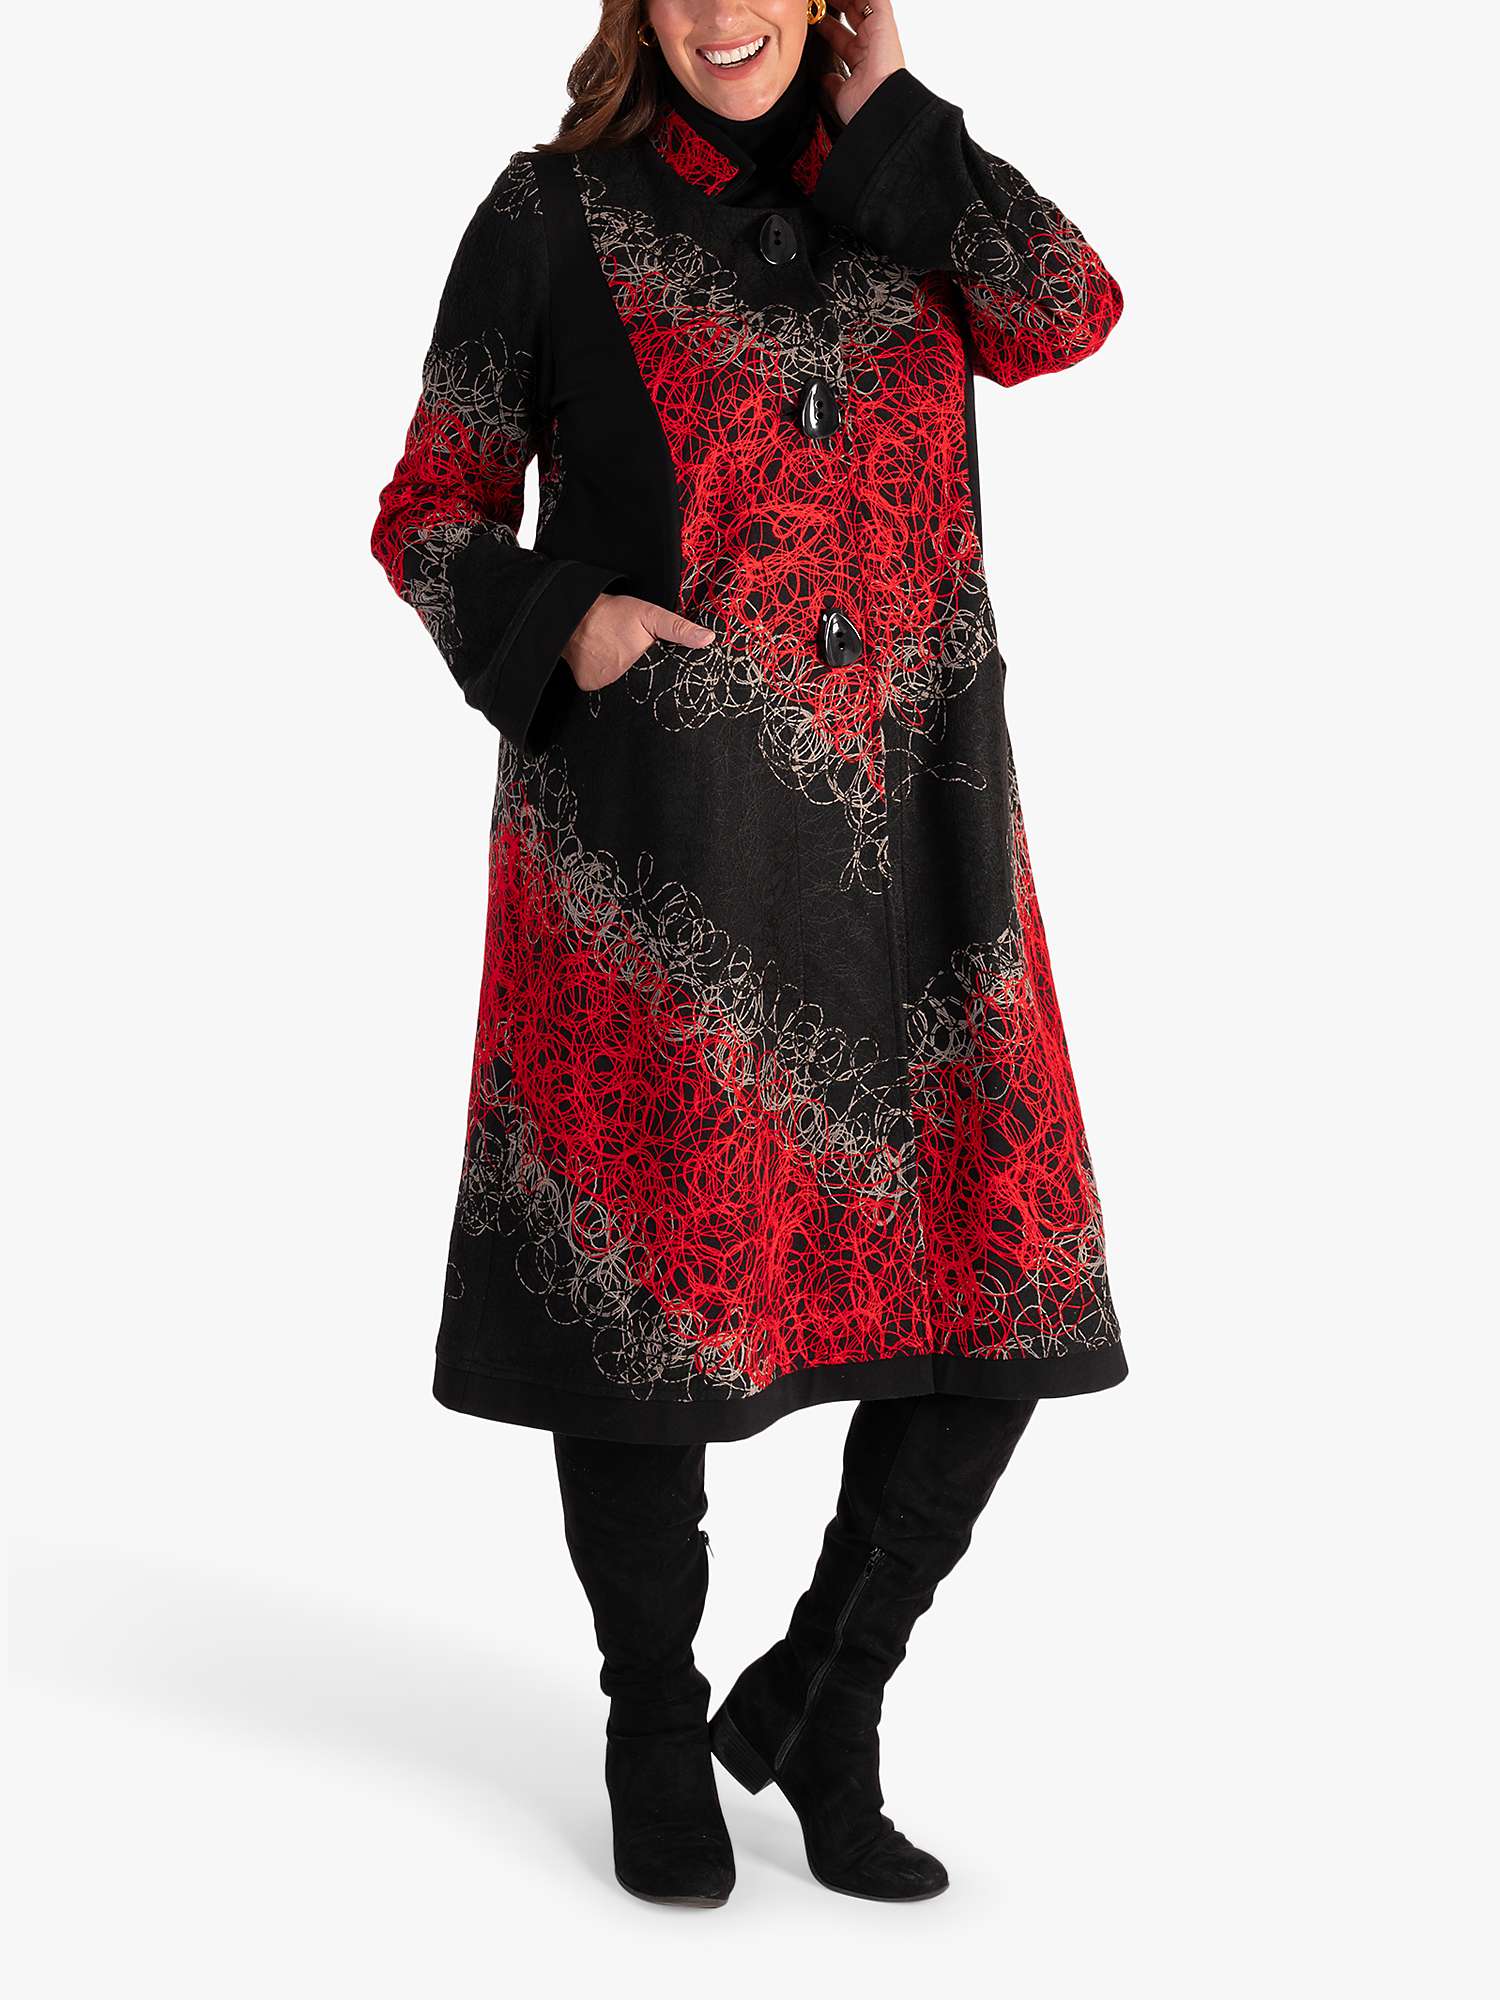 Buy chesca Scribble Embroidered Coat, Black/Red Online at johnlewis.com